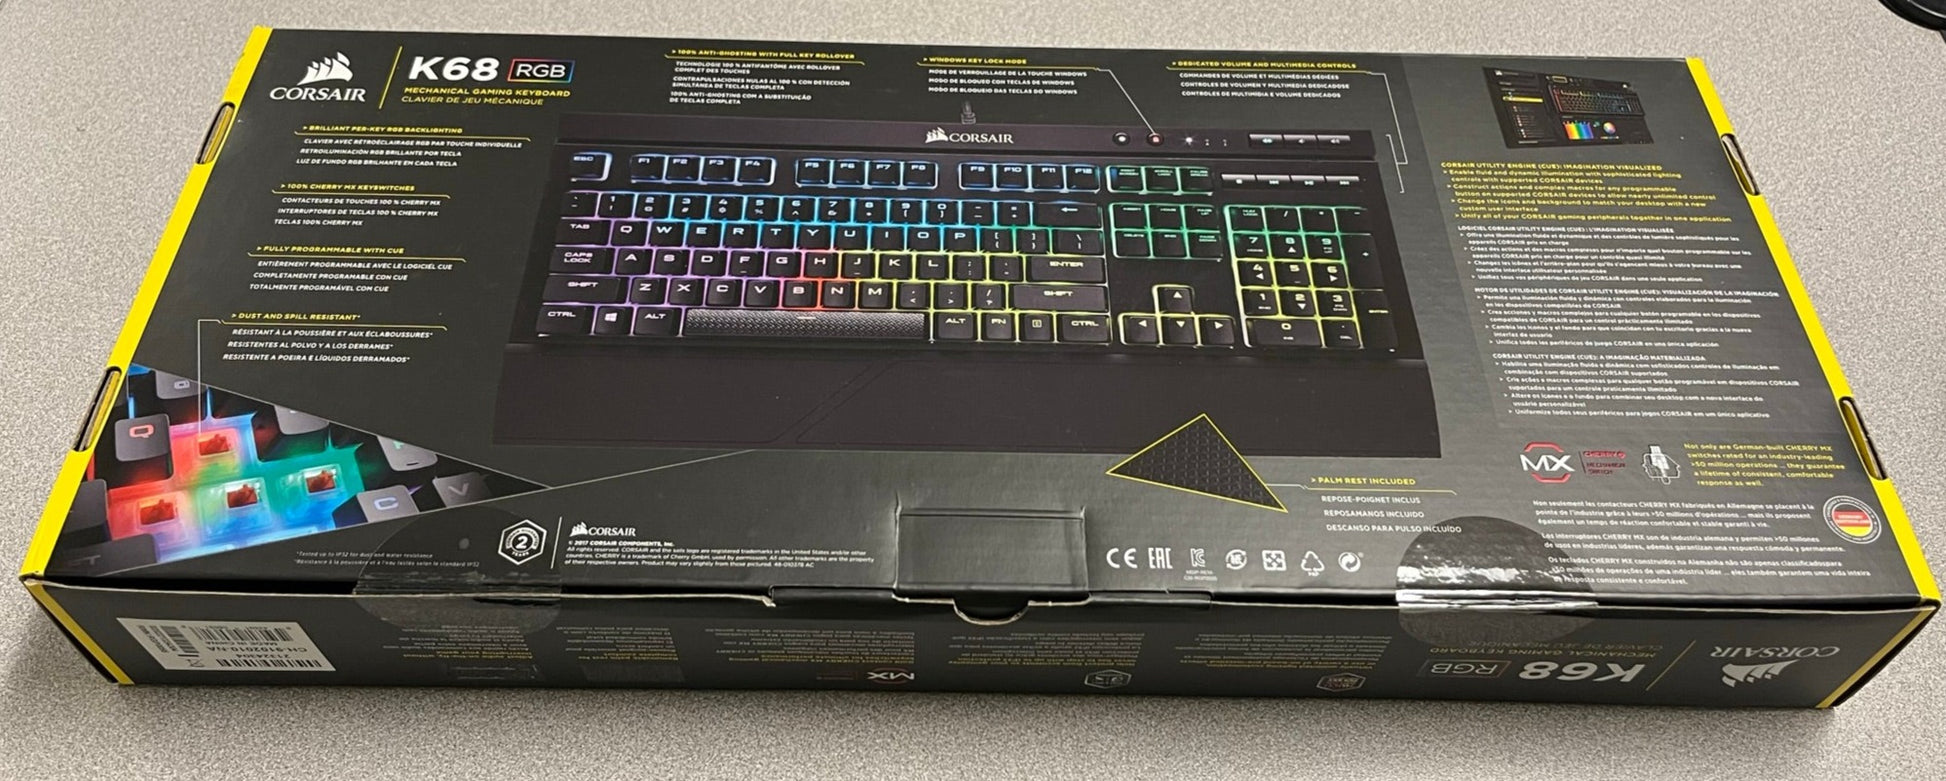 Corsair K68 Mechanical Gaming Keyboard, Cherry MX Red, We Sell Professional Audio Equipment. Audio Systems, Amplifiers, Consoles, Mixers, Electronics, Entertainment, Sound, Live. 